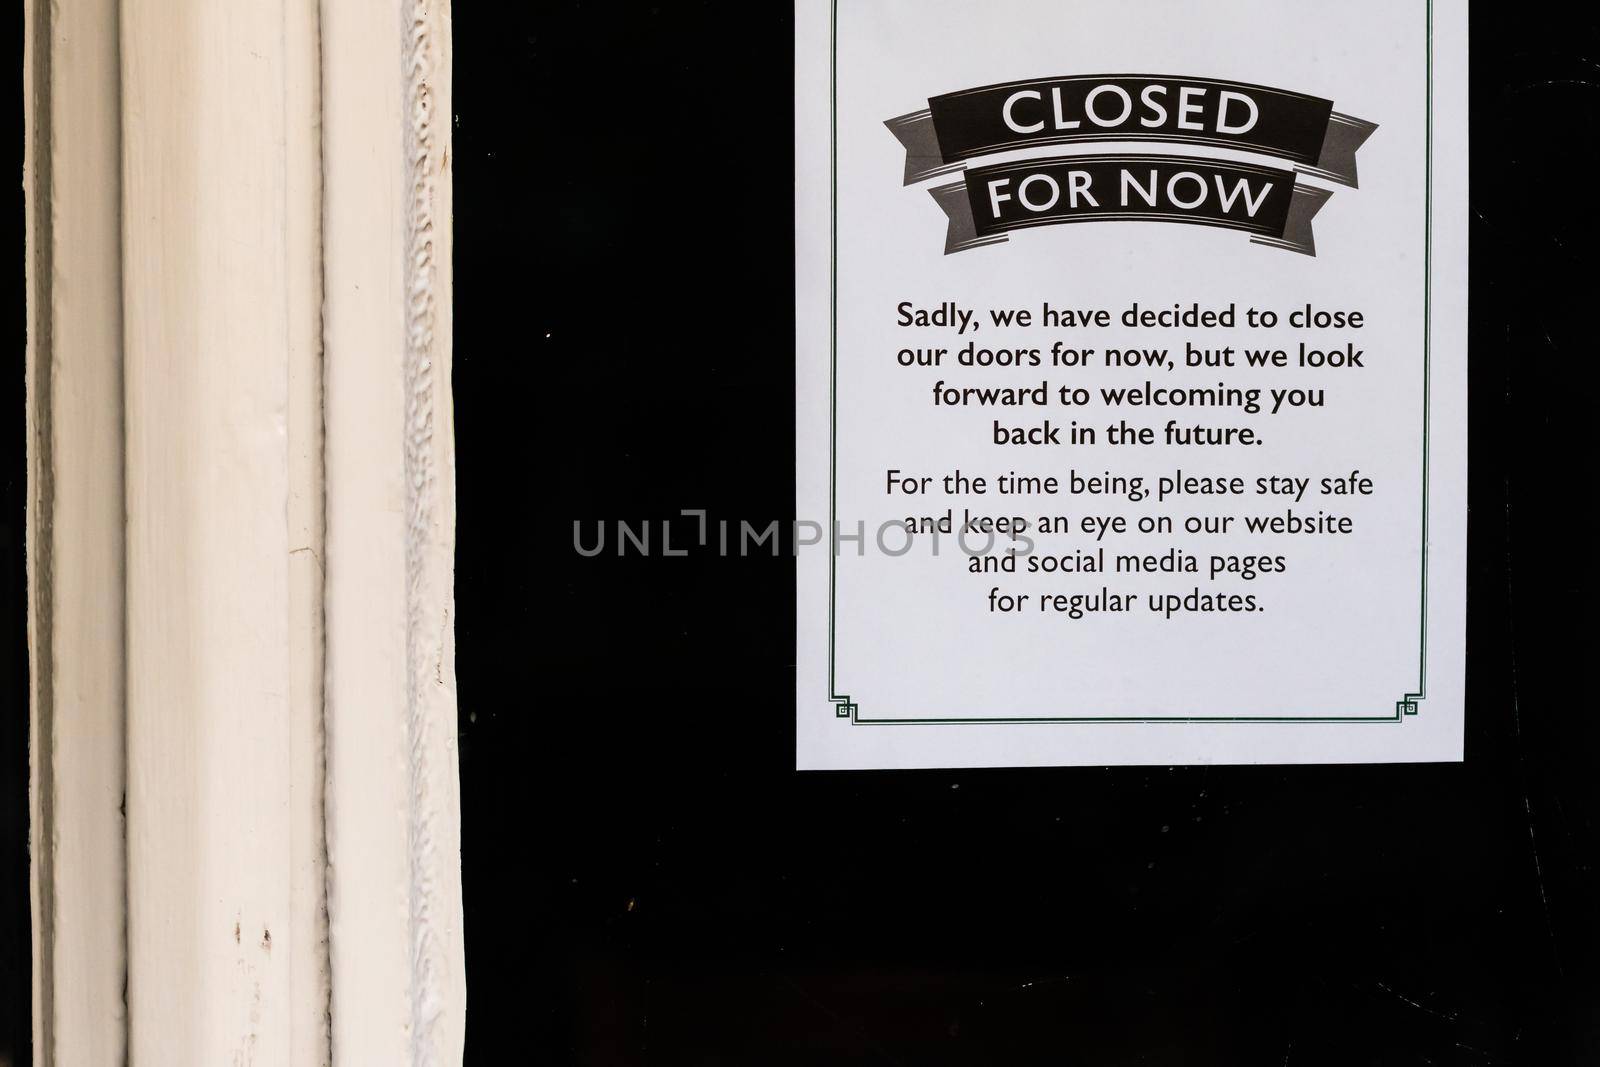 Closed for now sign on a restaurant window during lockdown caused by covid-19 pandemic